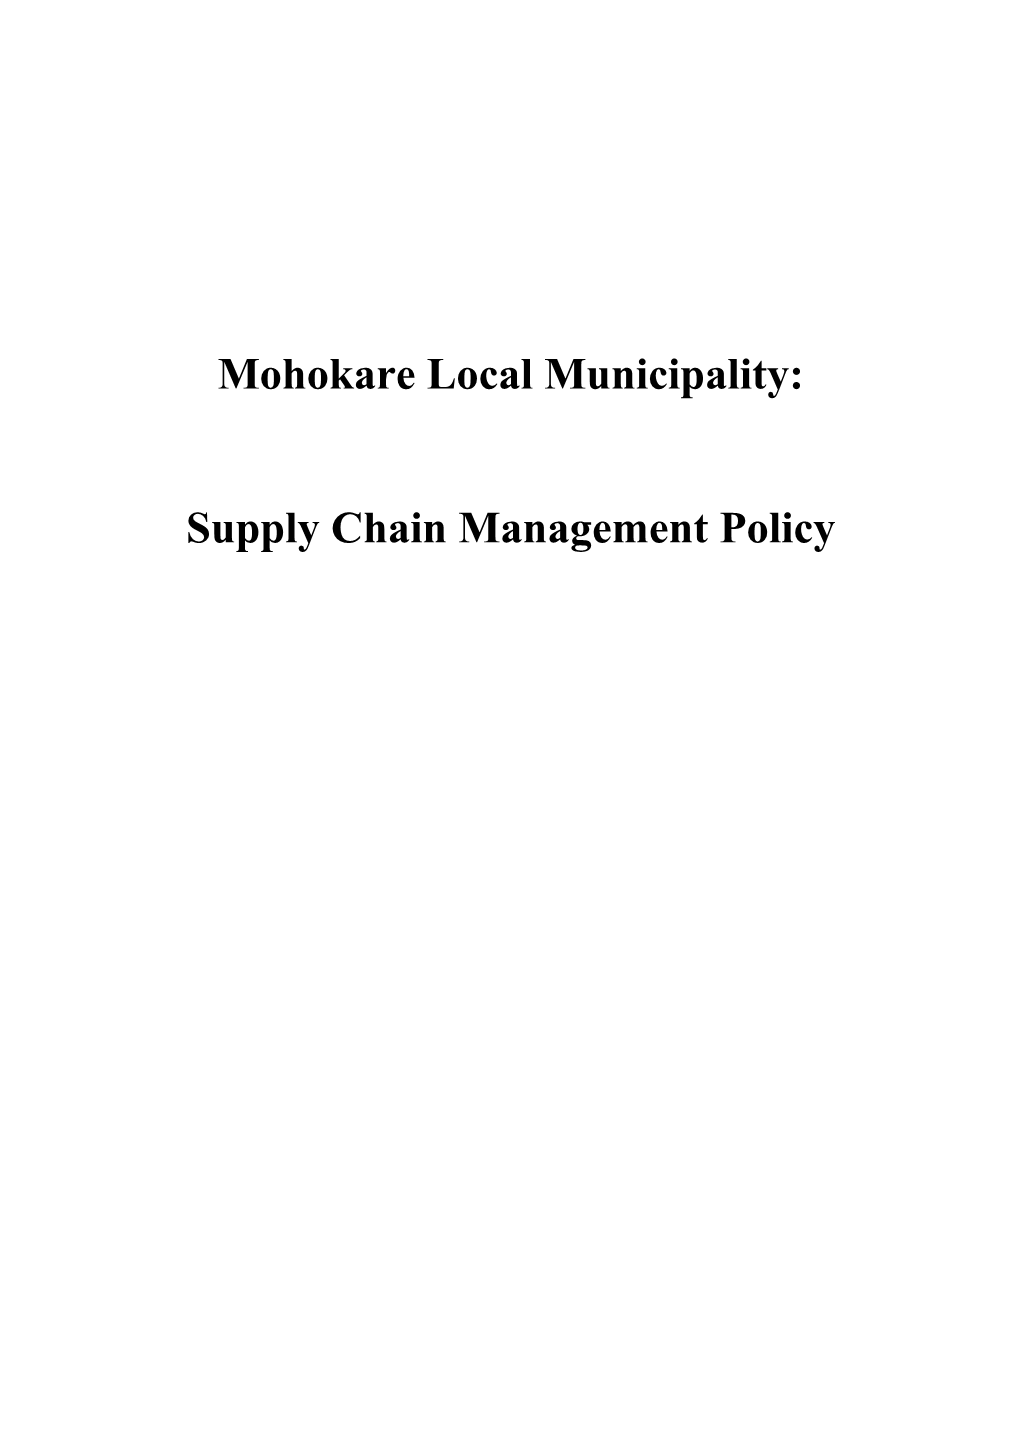 Supply Chain Management Policy